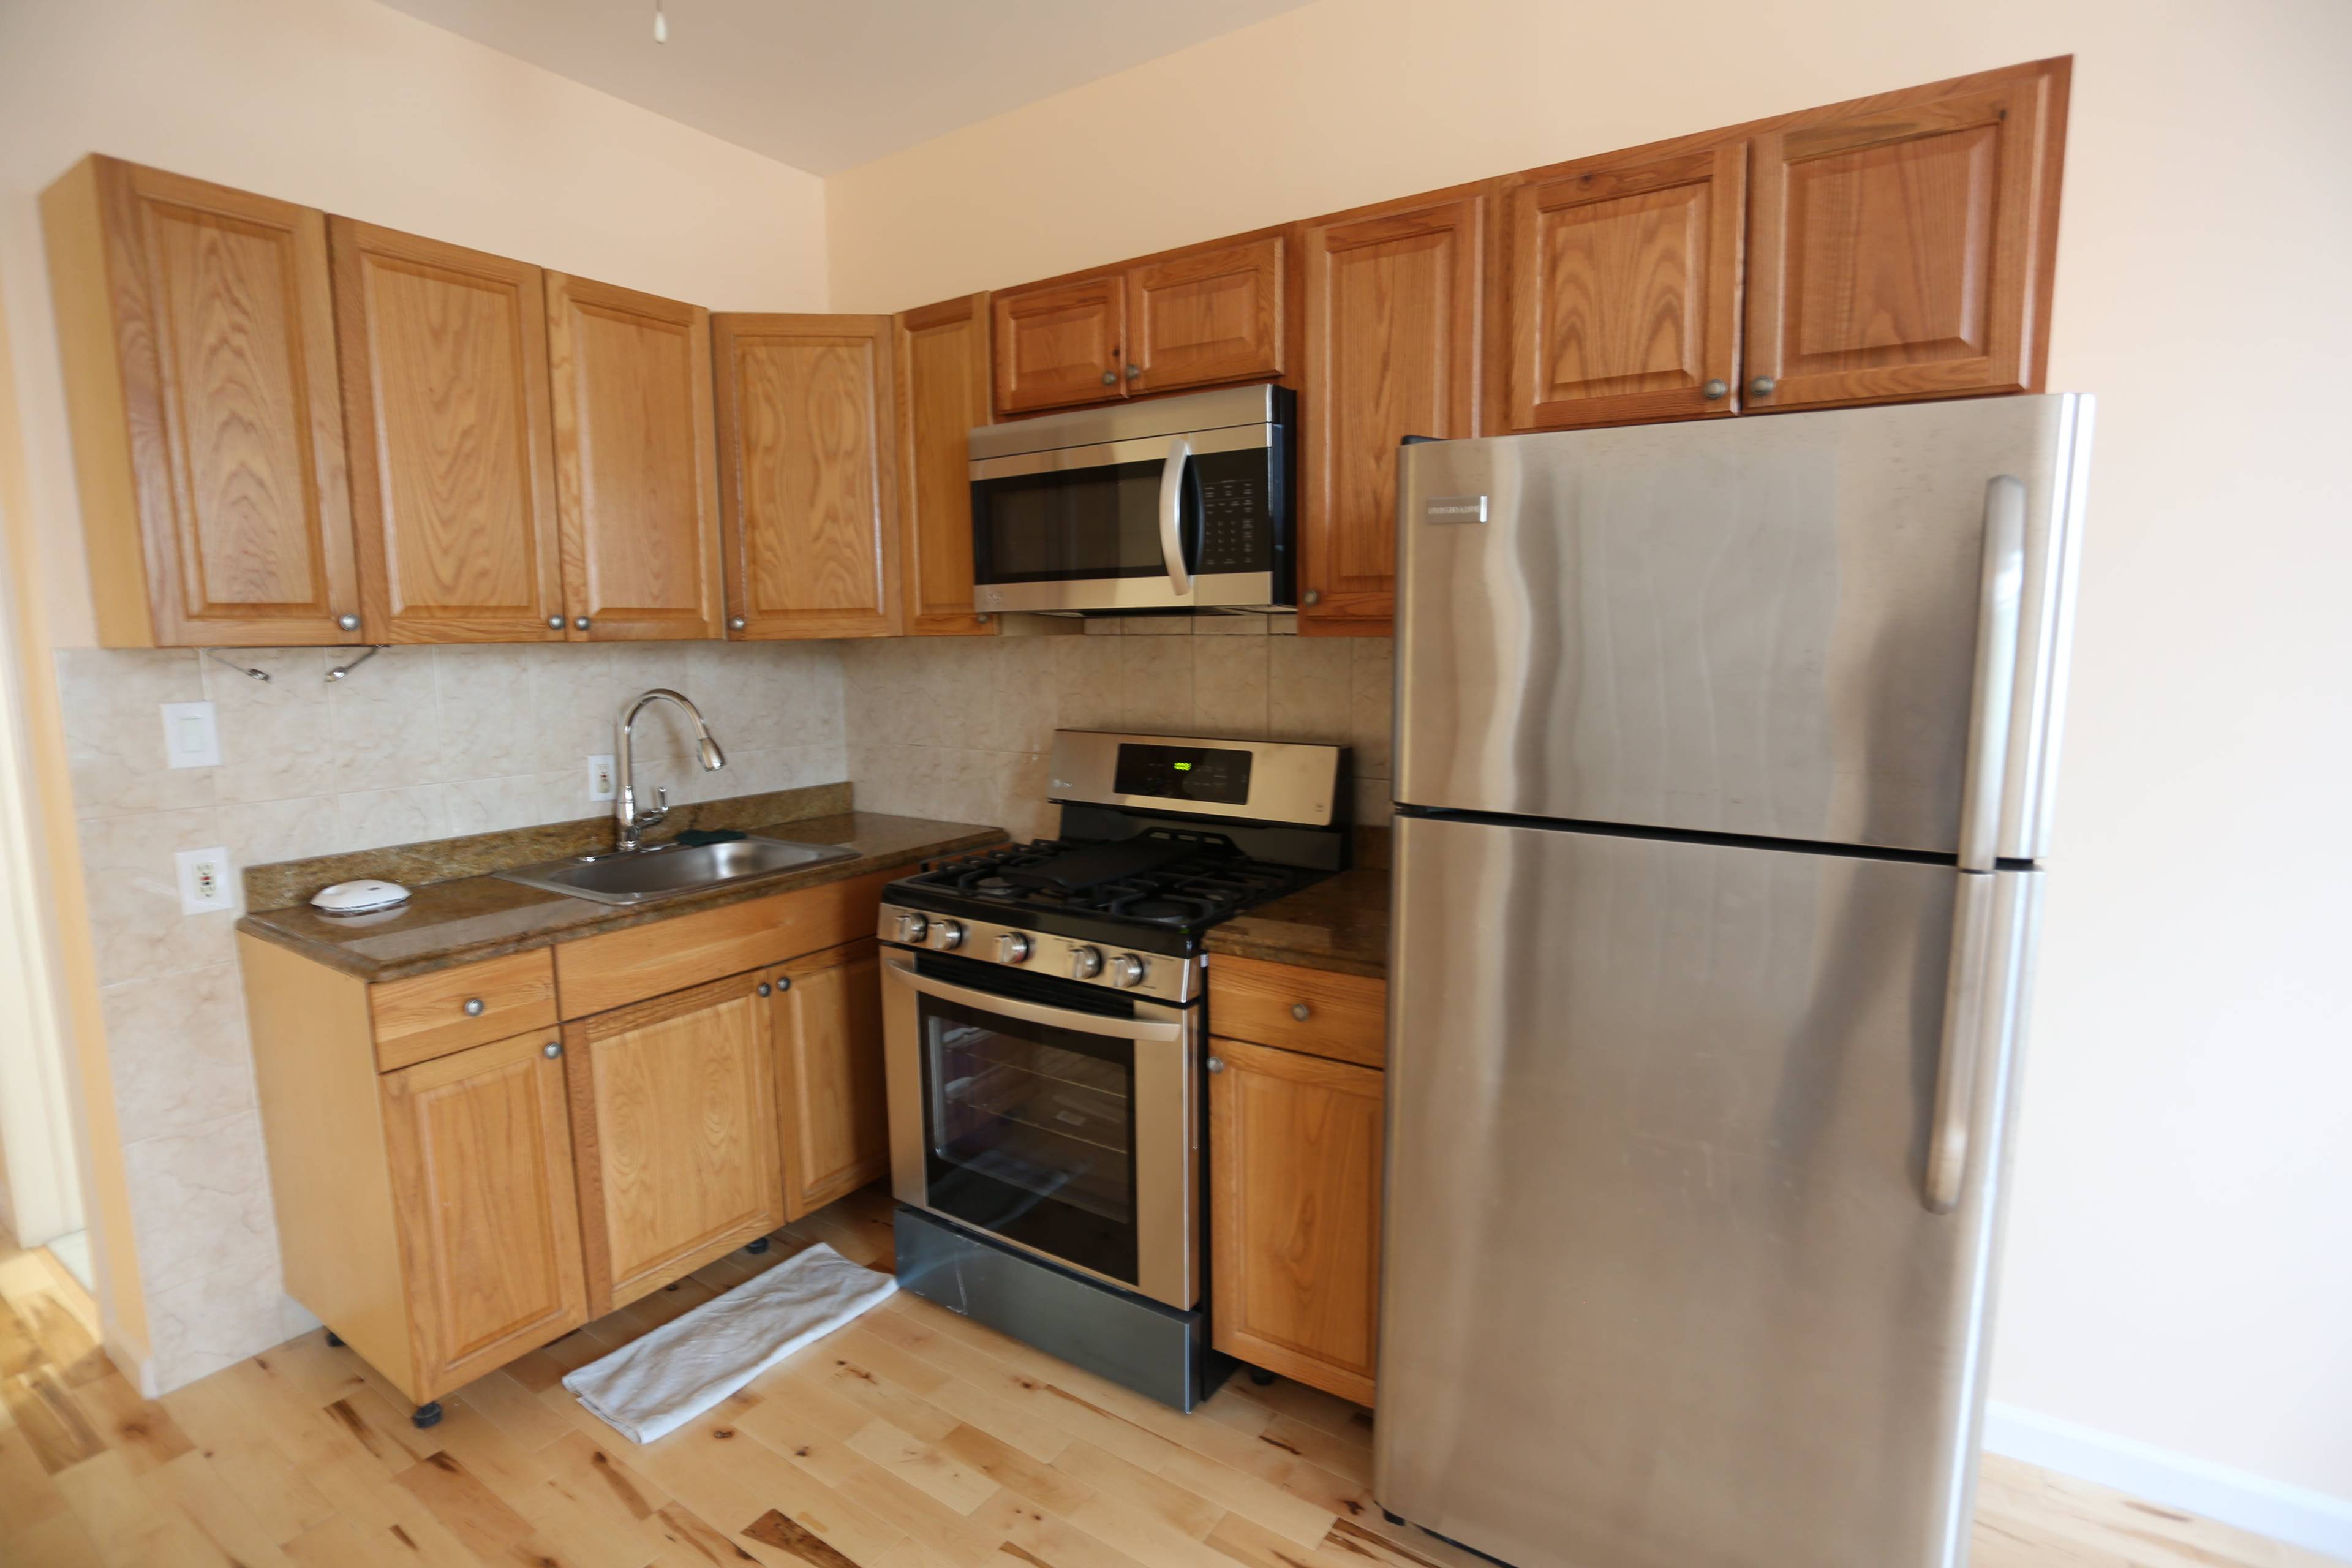 Beatifully Renovated 1 Bedroom on a Tree Lined Street in the Heart of Greenpoint!